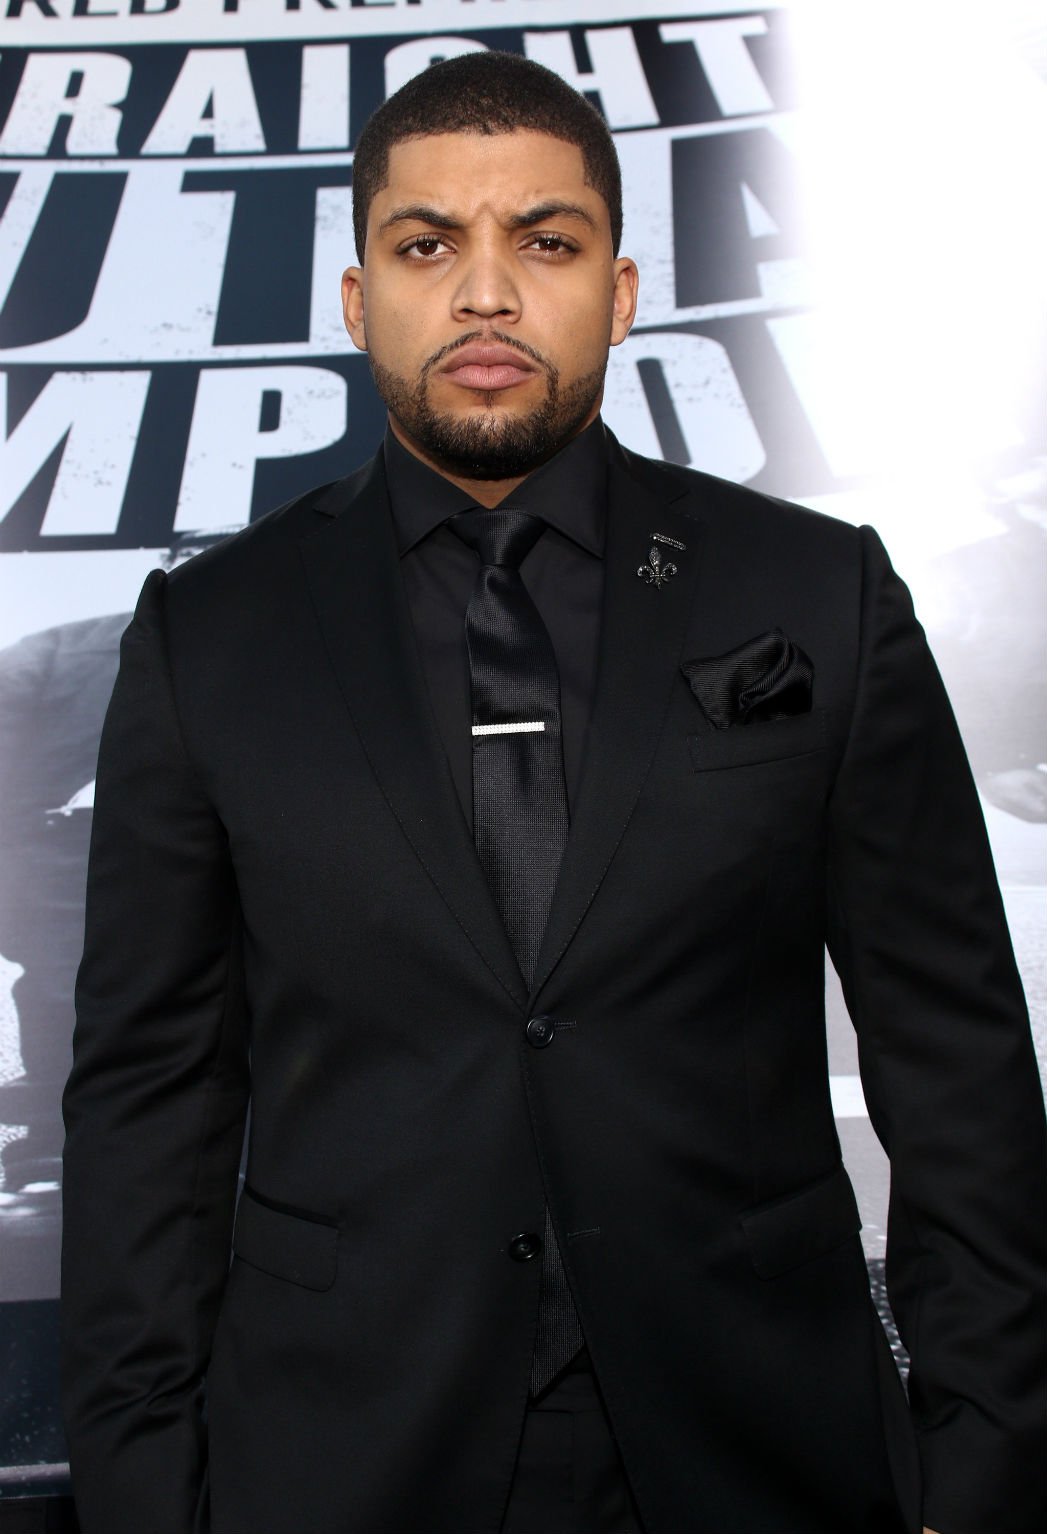 Pictures of O'Shea Jackson Jr. - Pictures Of Celebrities1047 x 1534